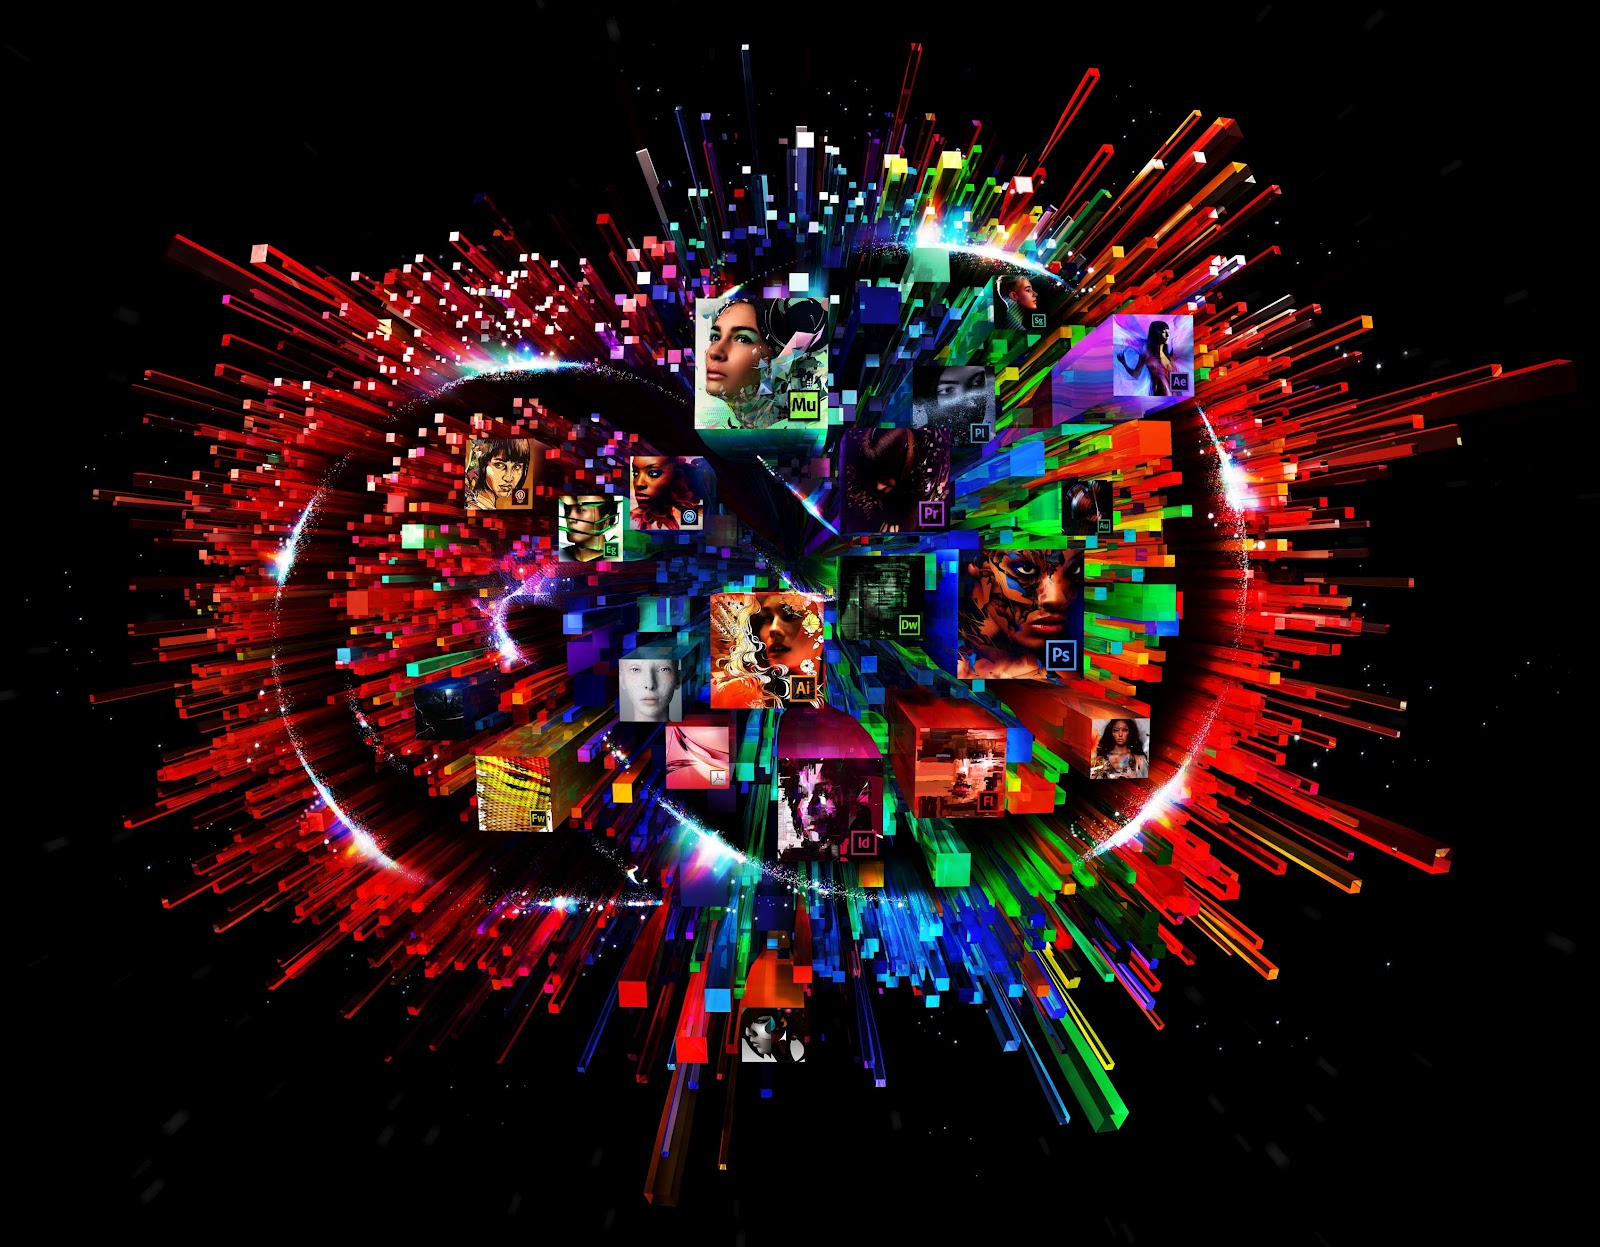 software you want: Adobe Creative Suite 6